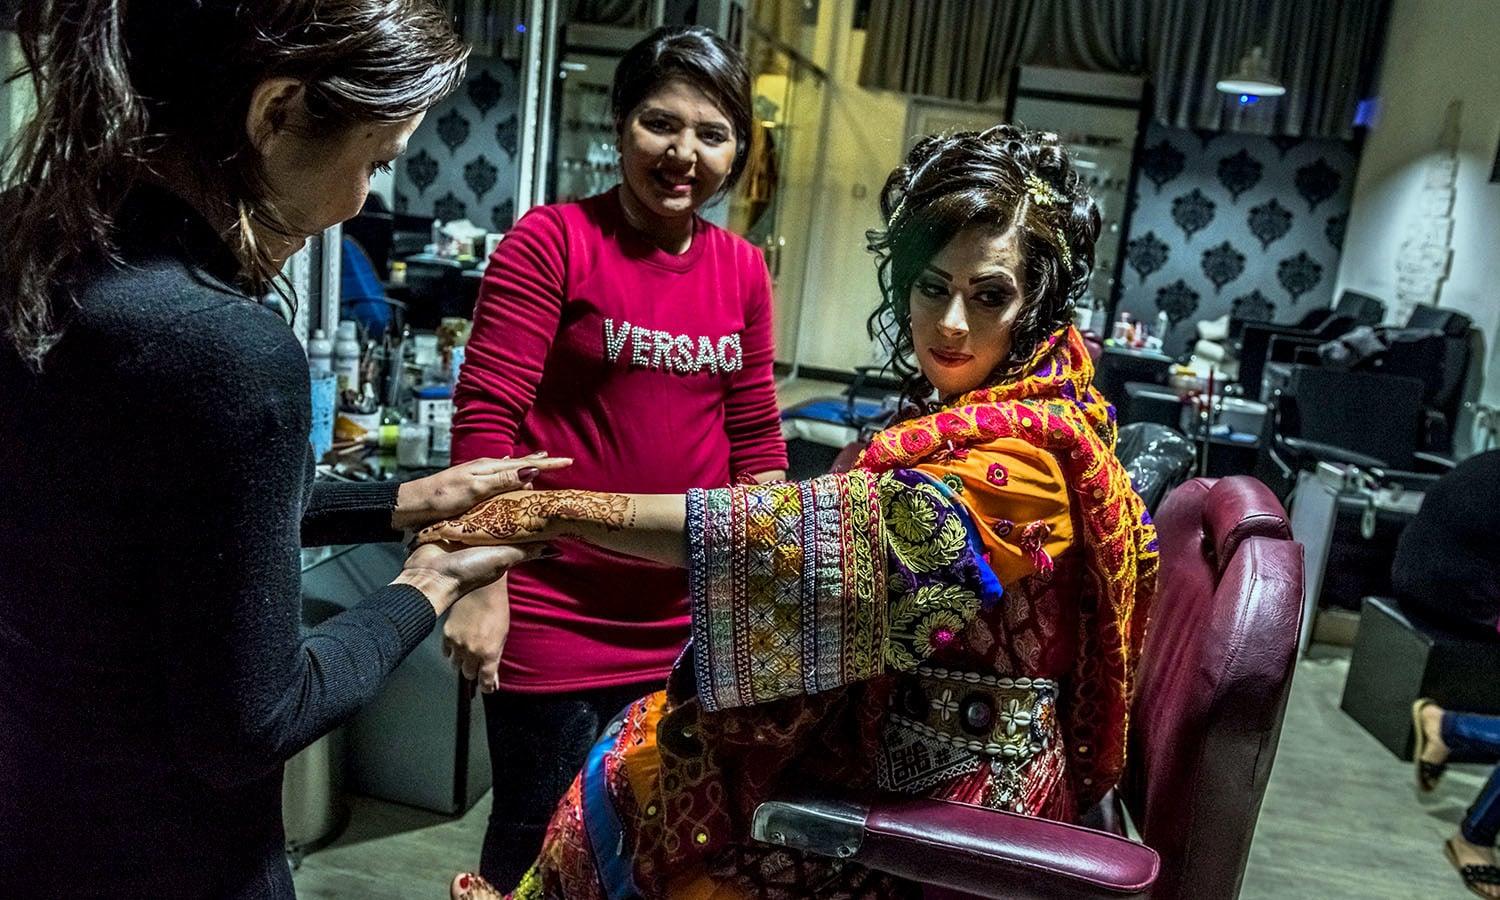 Taliban Administration orders Beauty Salons in Afghanistan to close